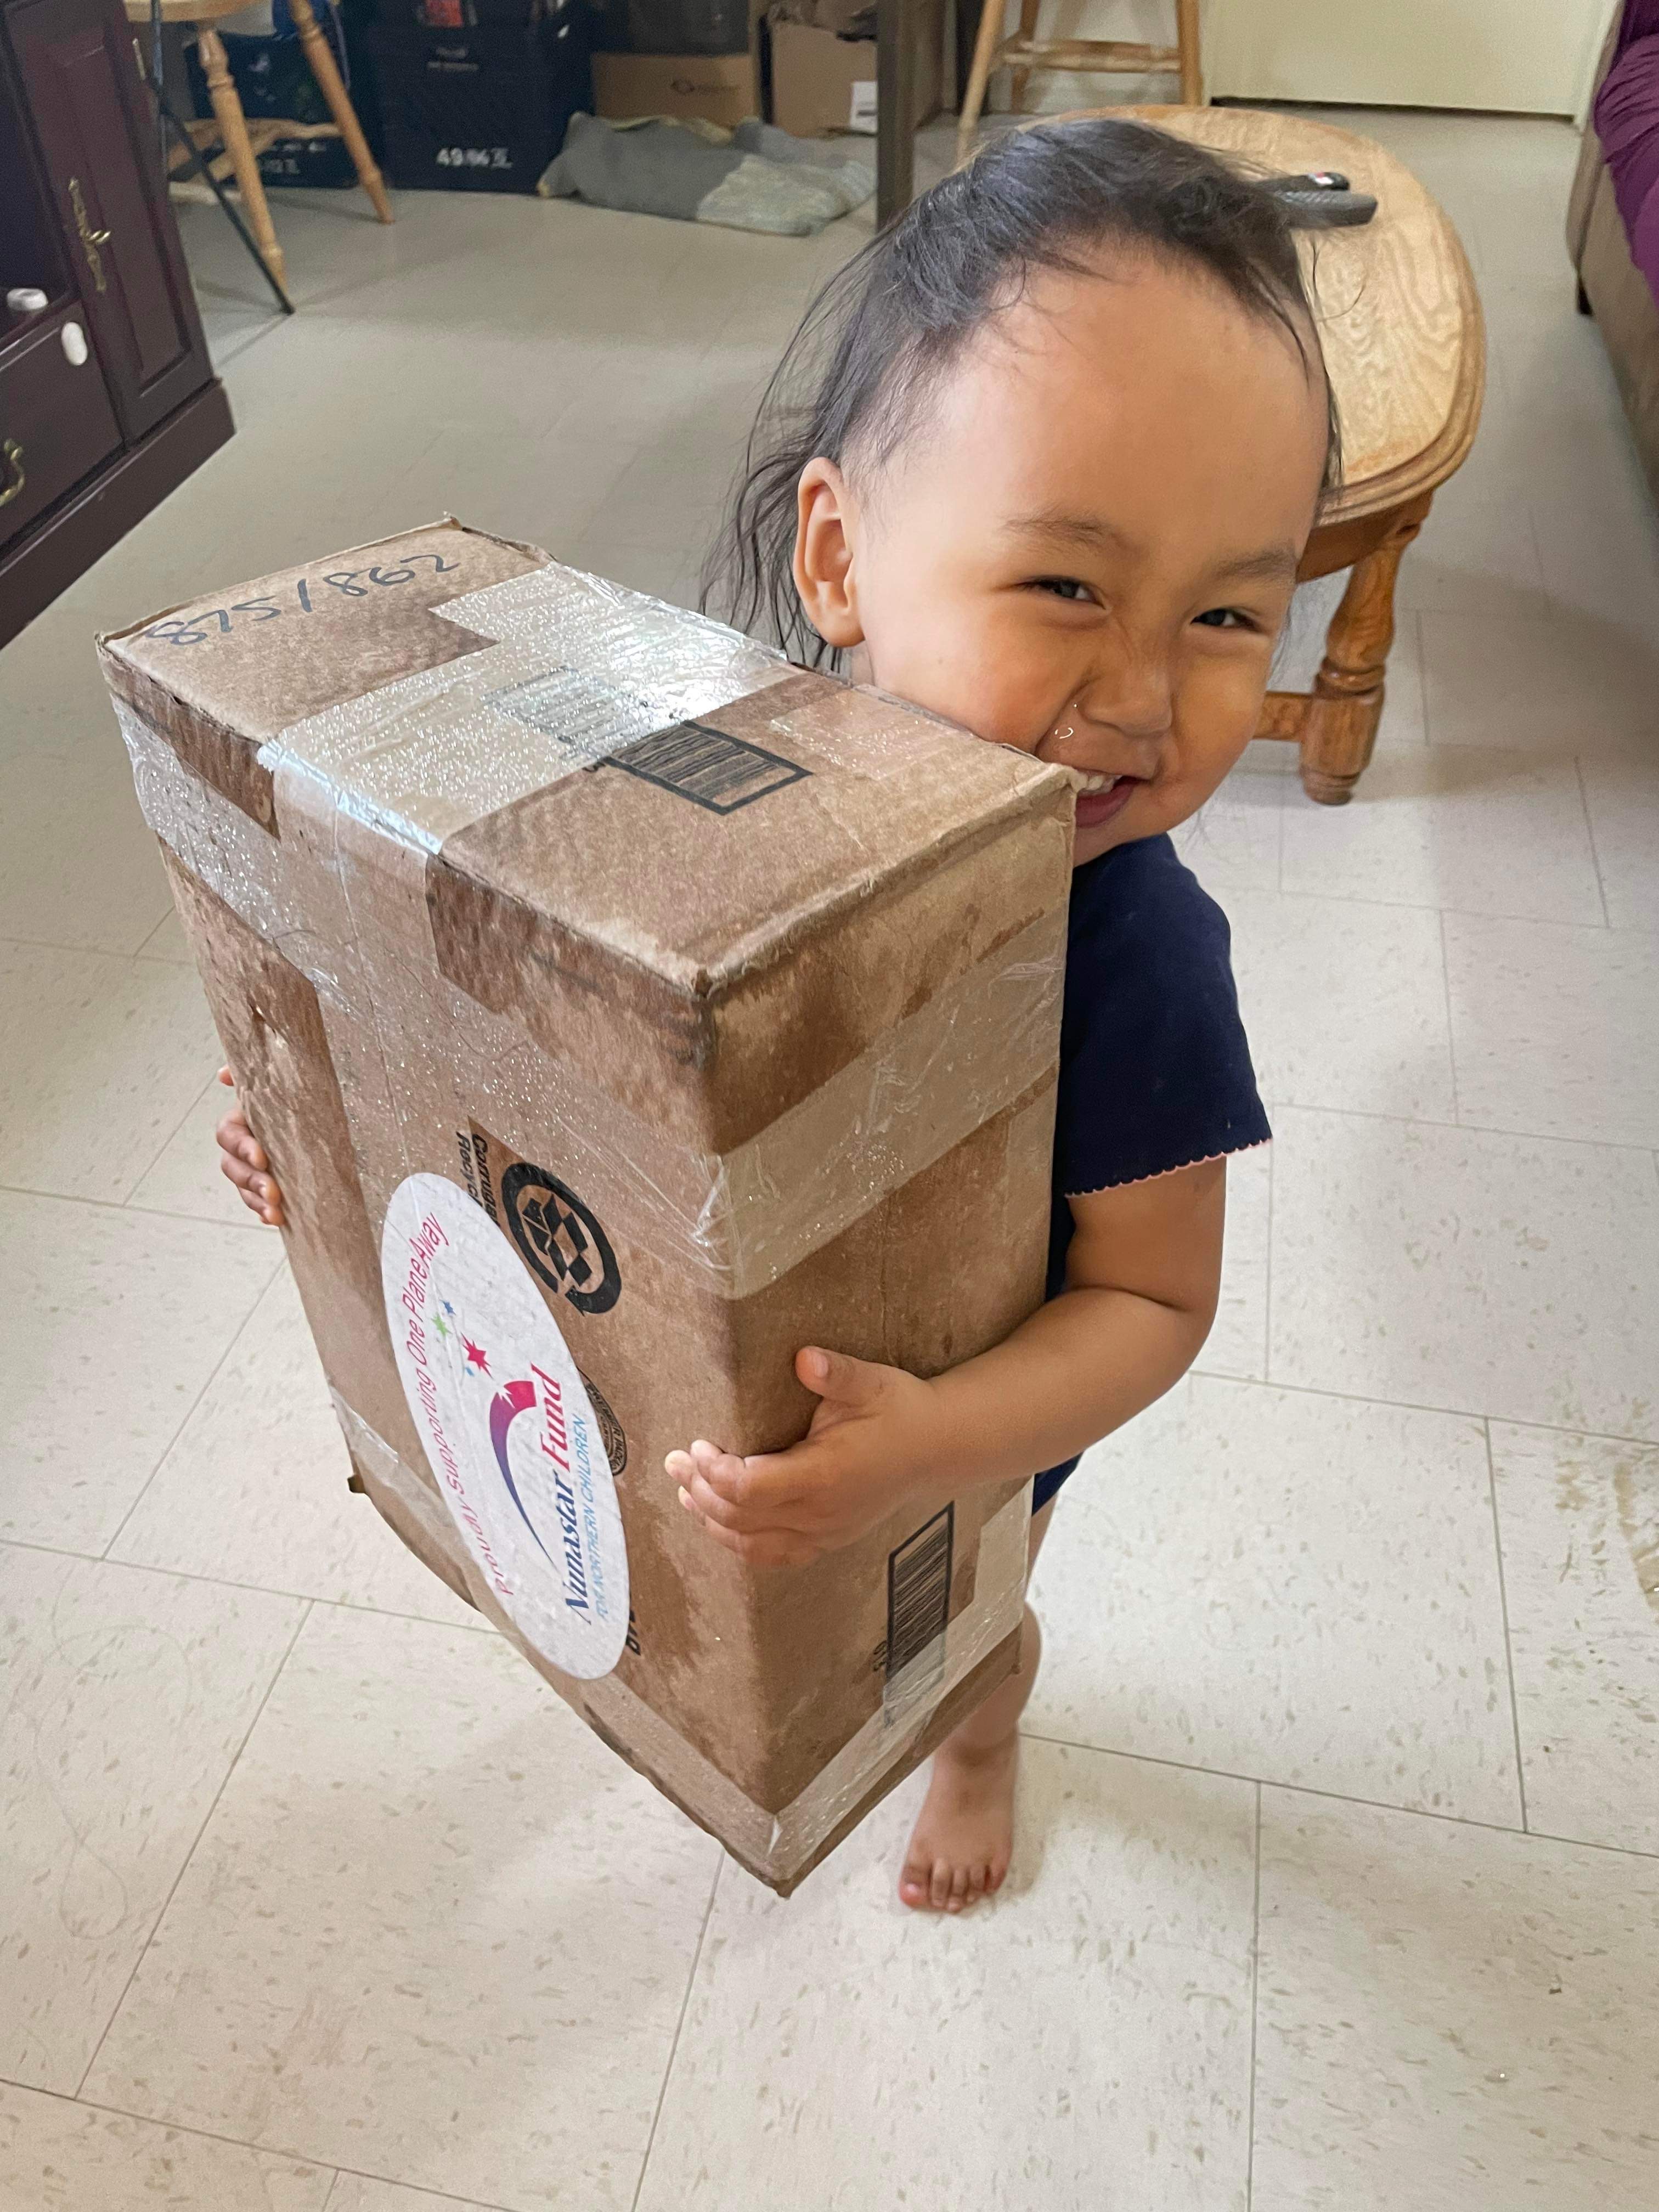 Smiling toddler carries a package from One Plane Away